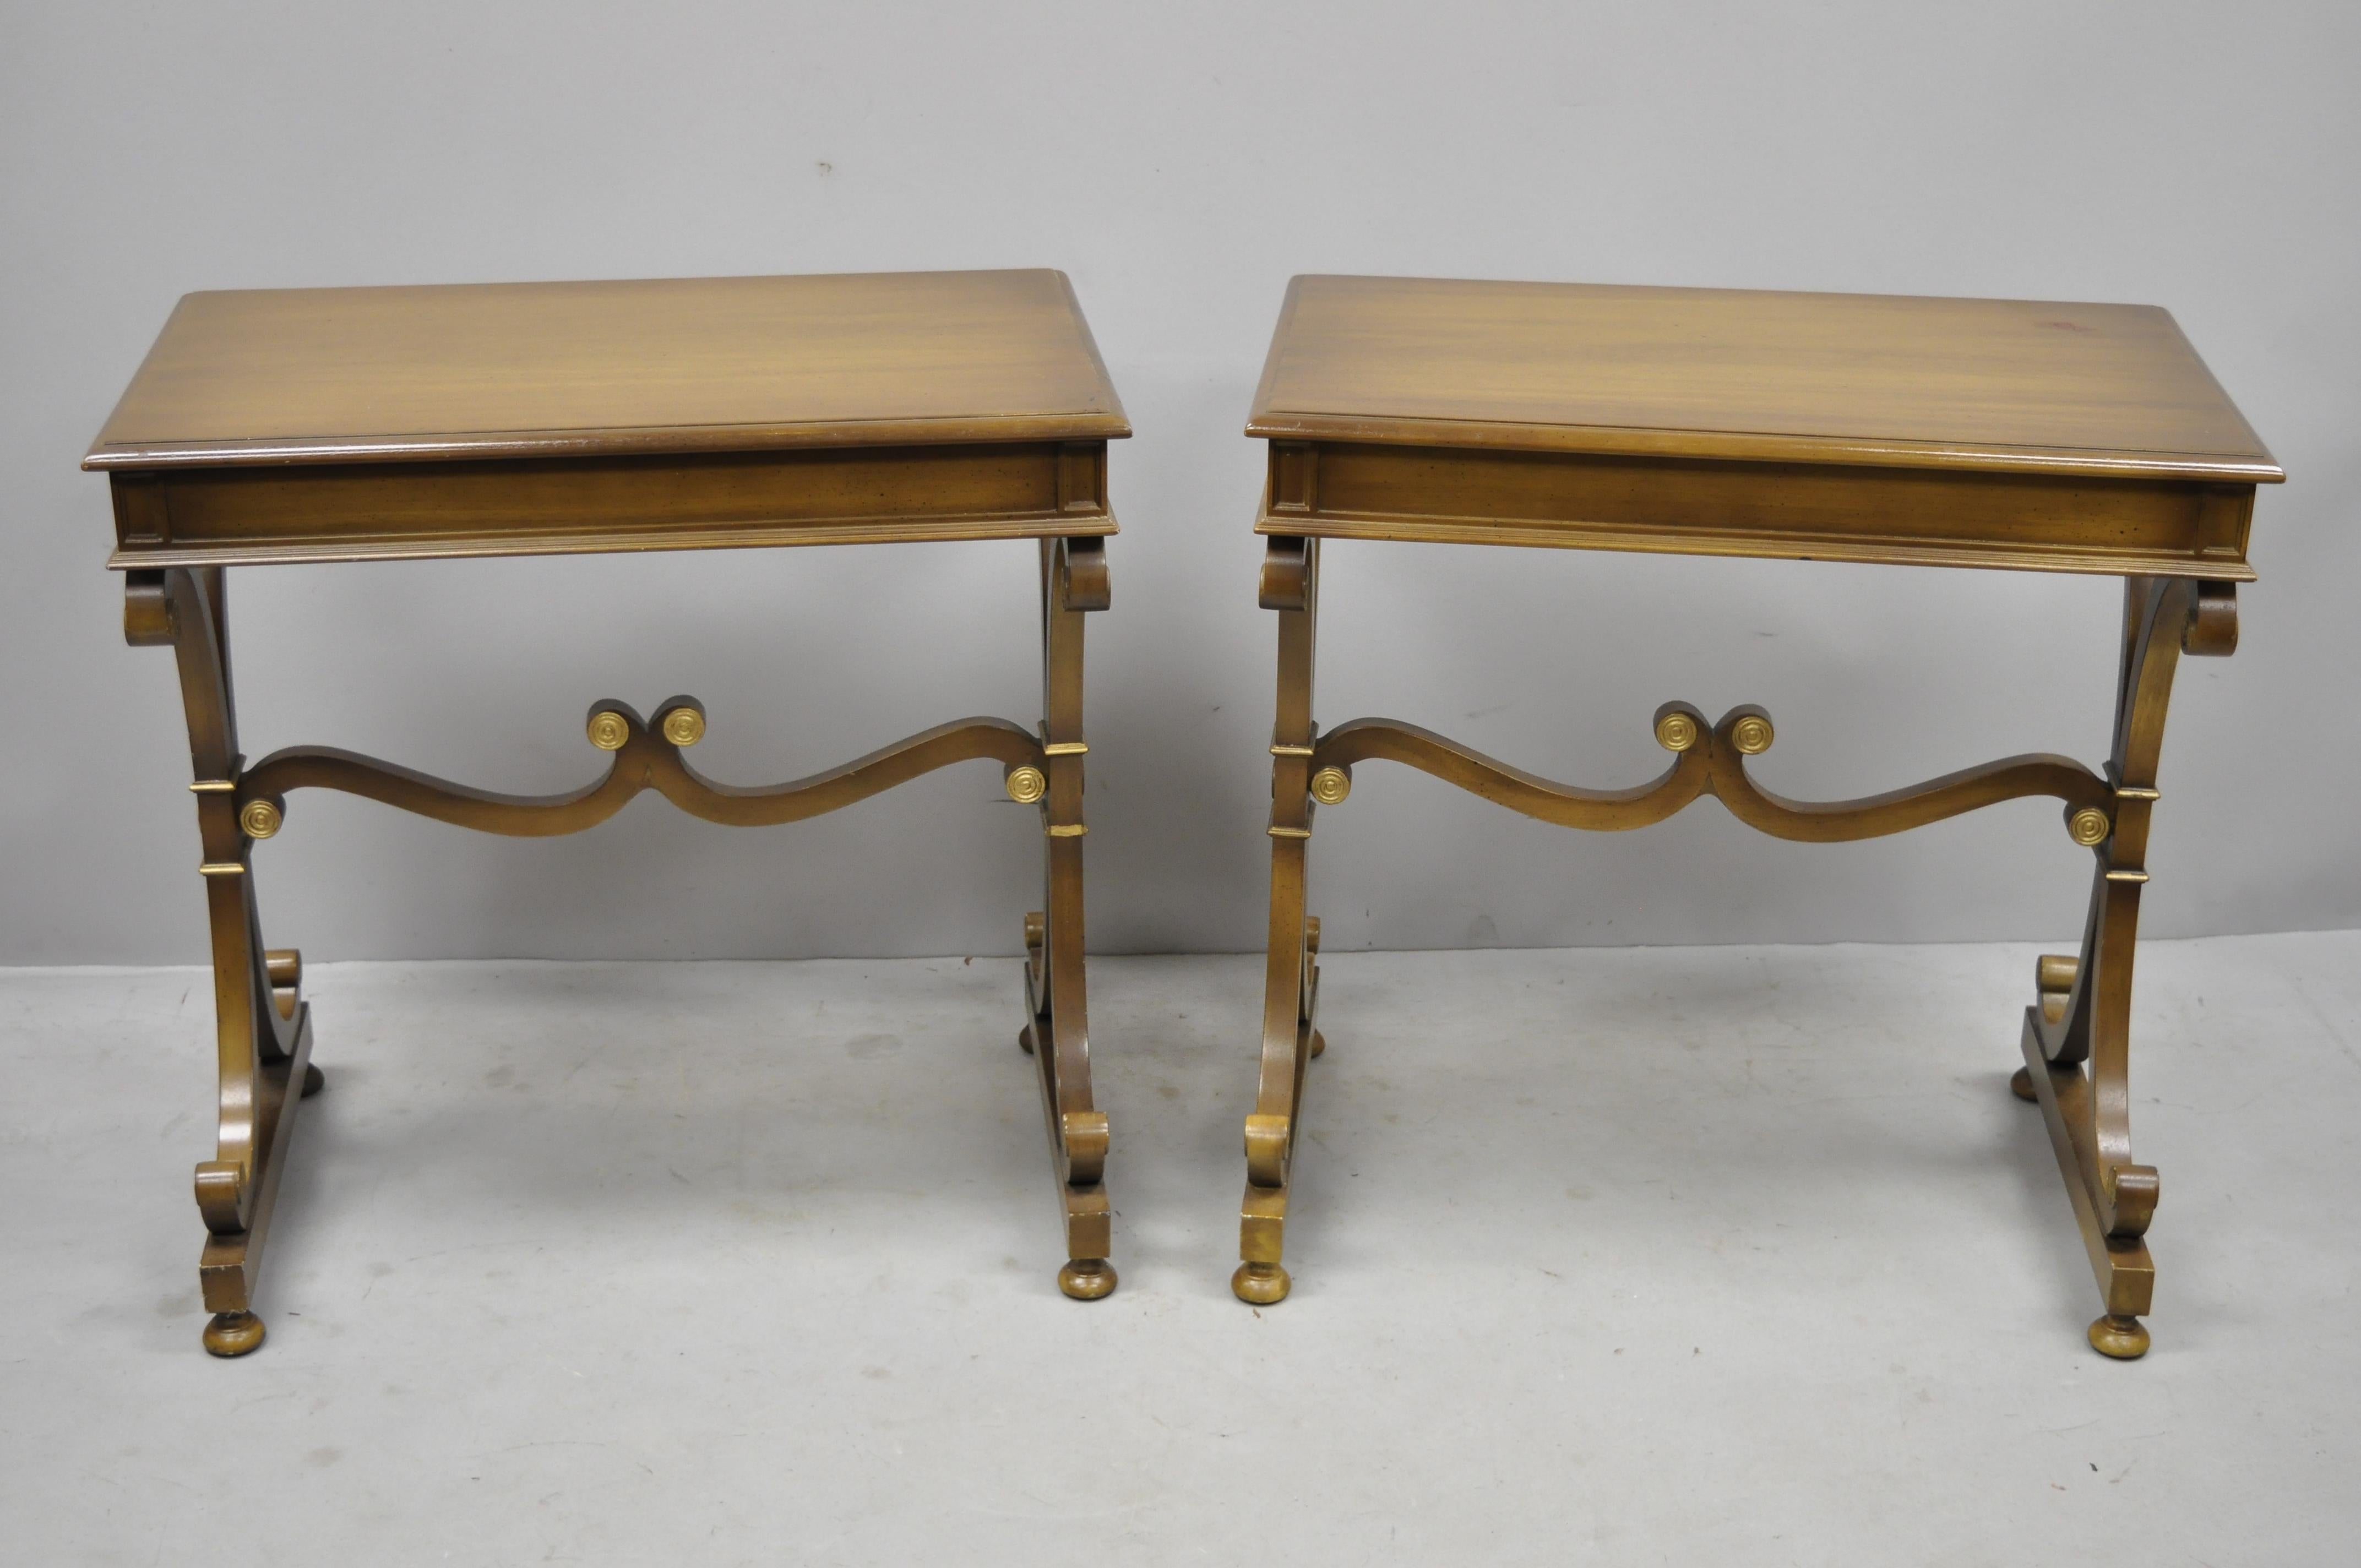 Pair of vintage mahogany Regency style X-frame lamp side end tables by J. Zonon. Items feature pullout / pull-out leather top surfaces on both sides, X-form supports, gold painted accents, original stamp, quality American craftsmanship, great style